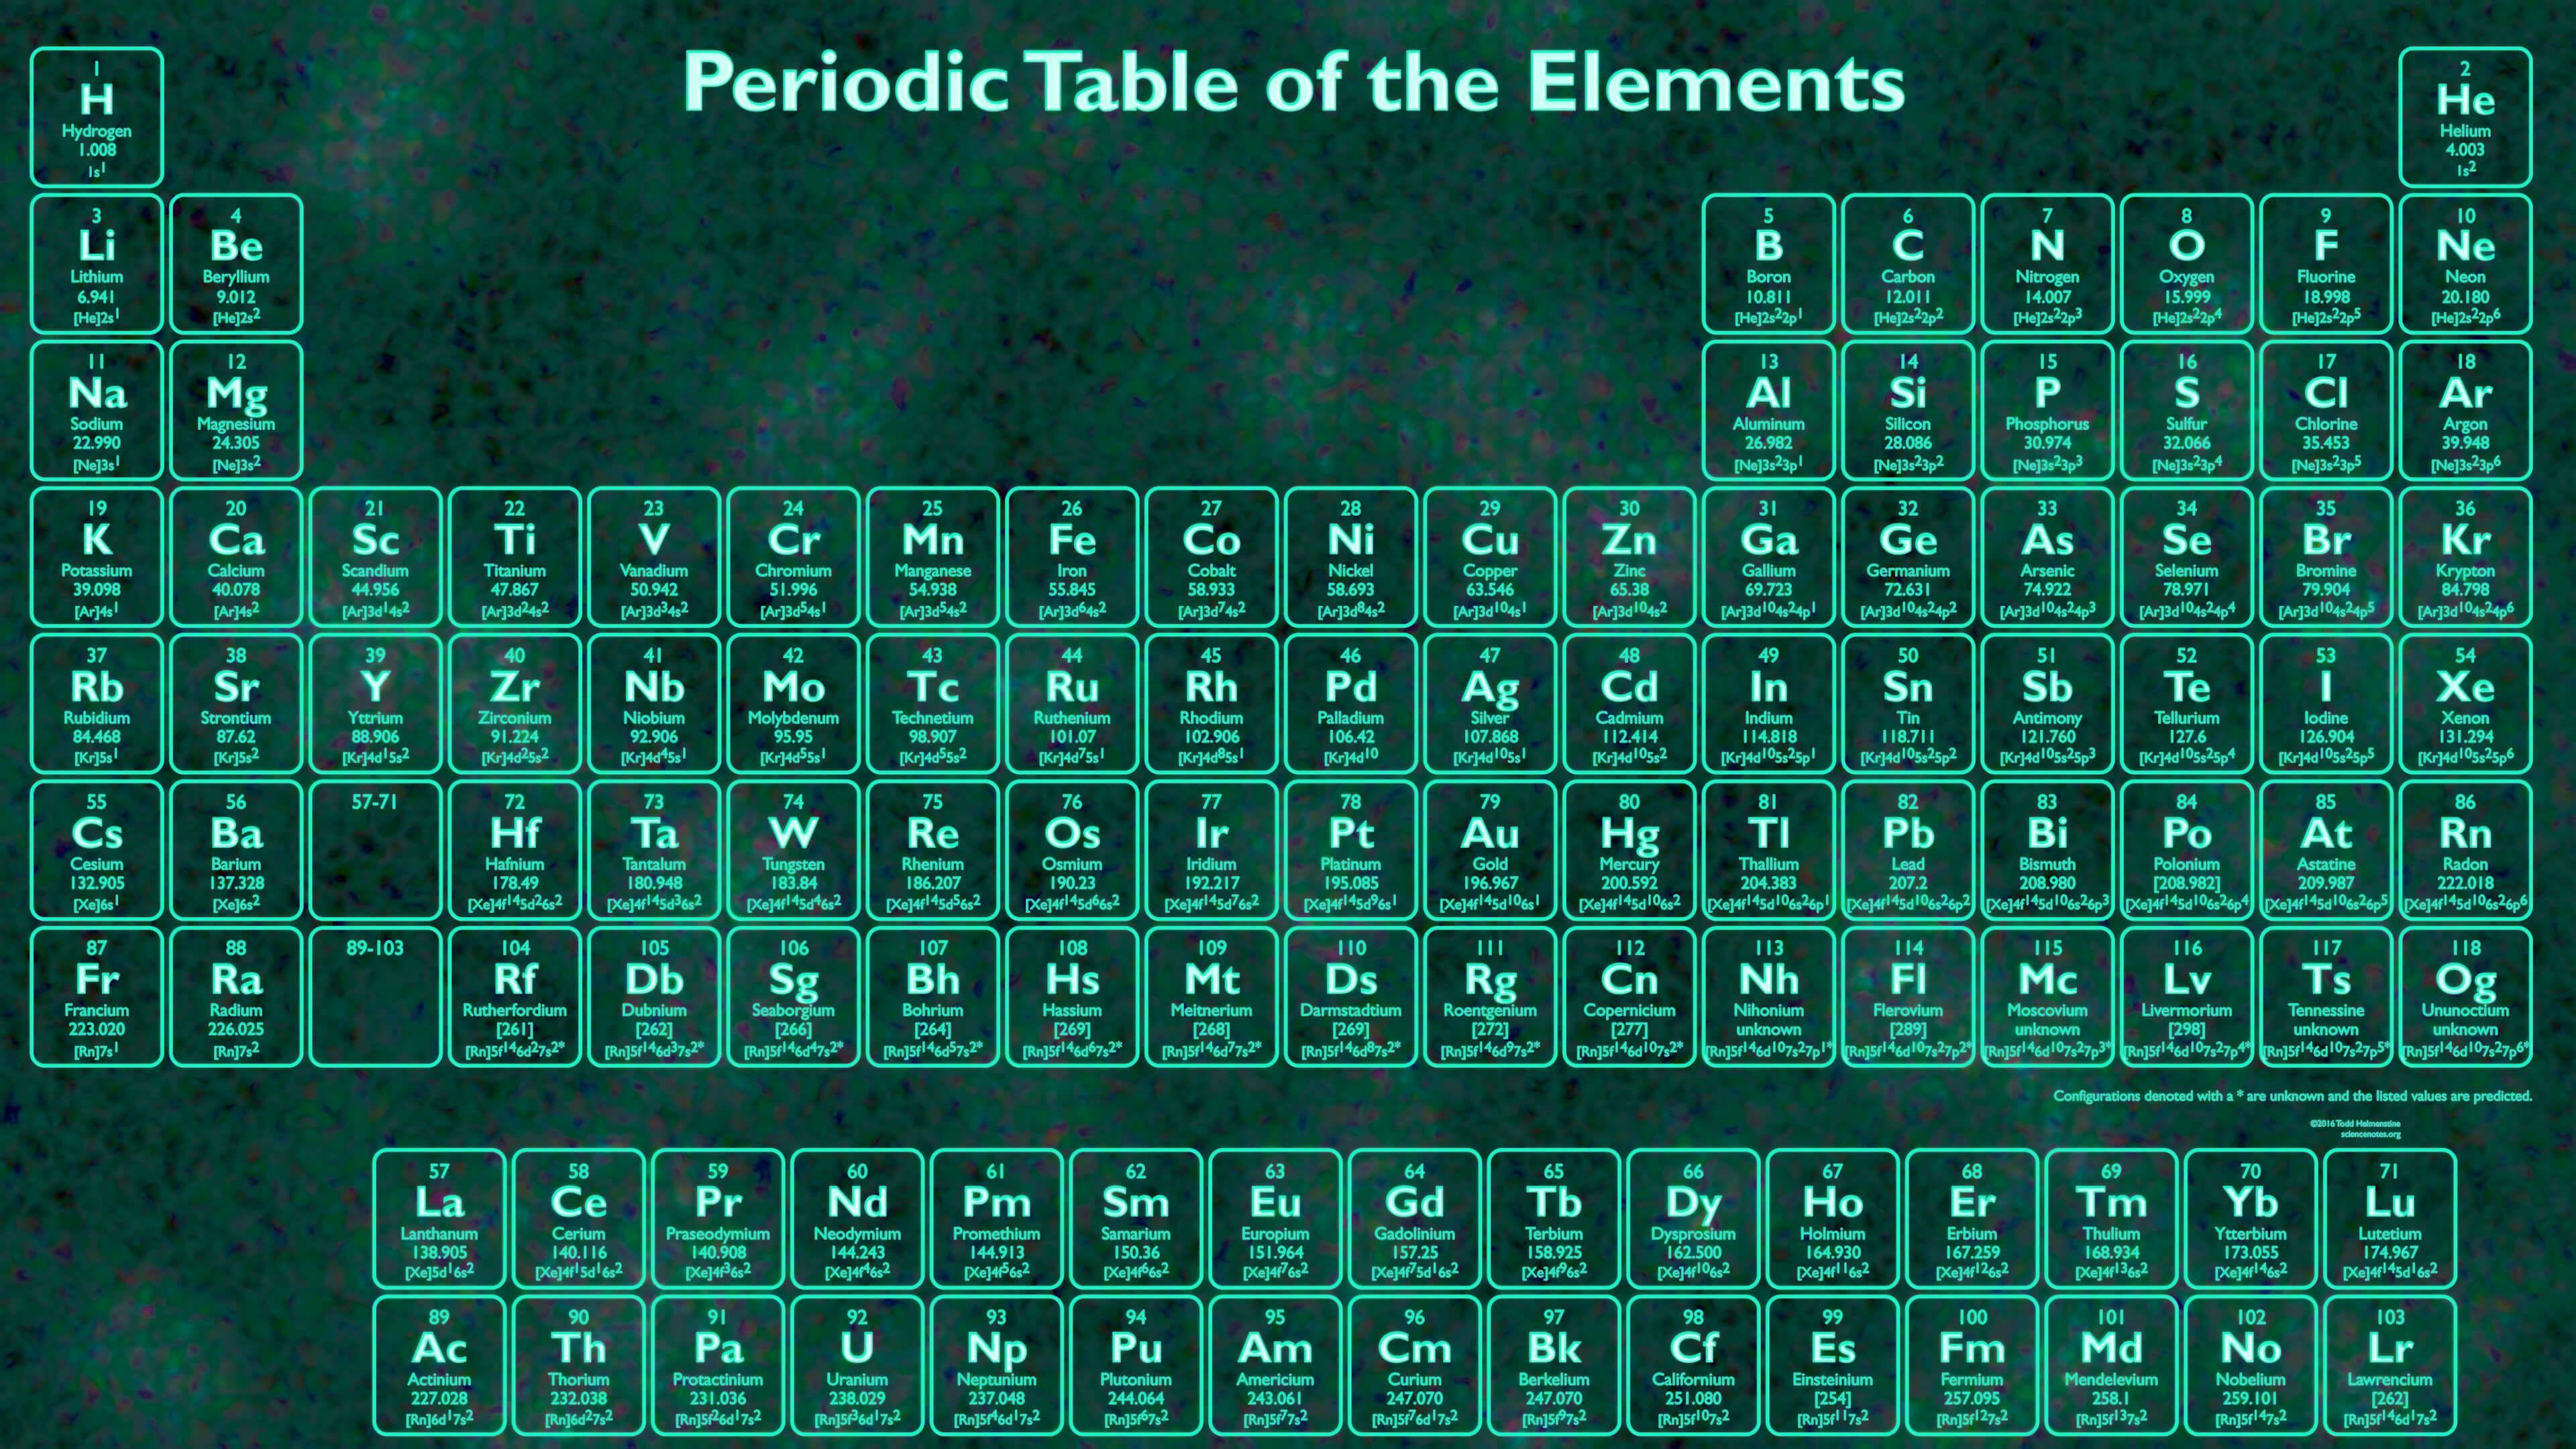 Glow In The Dark 4K Periodic Table Wallpaper With 118 Elements